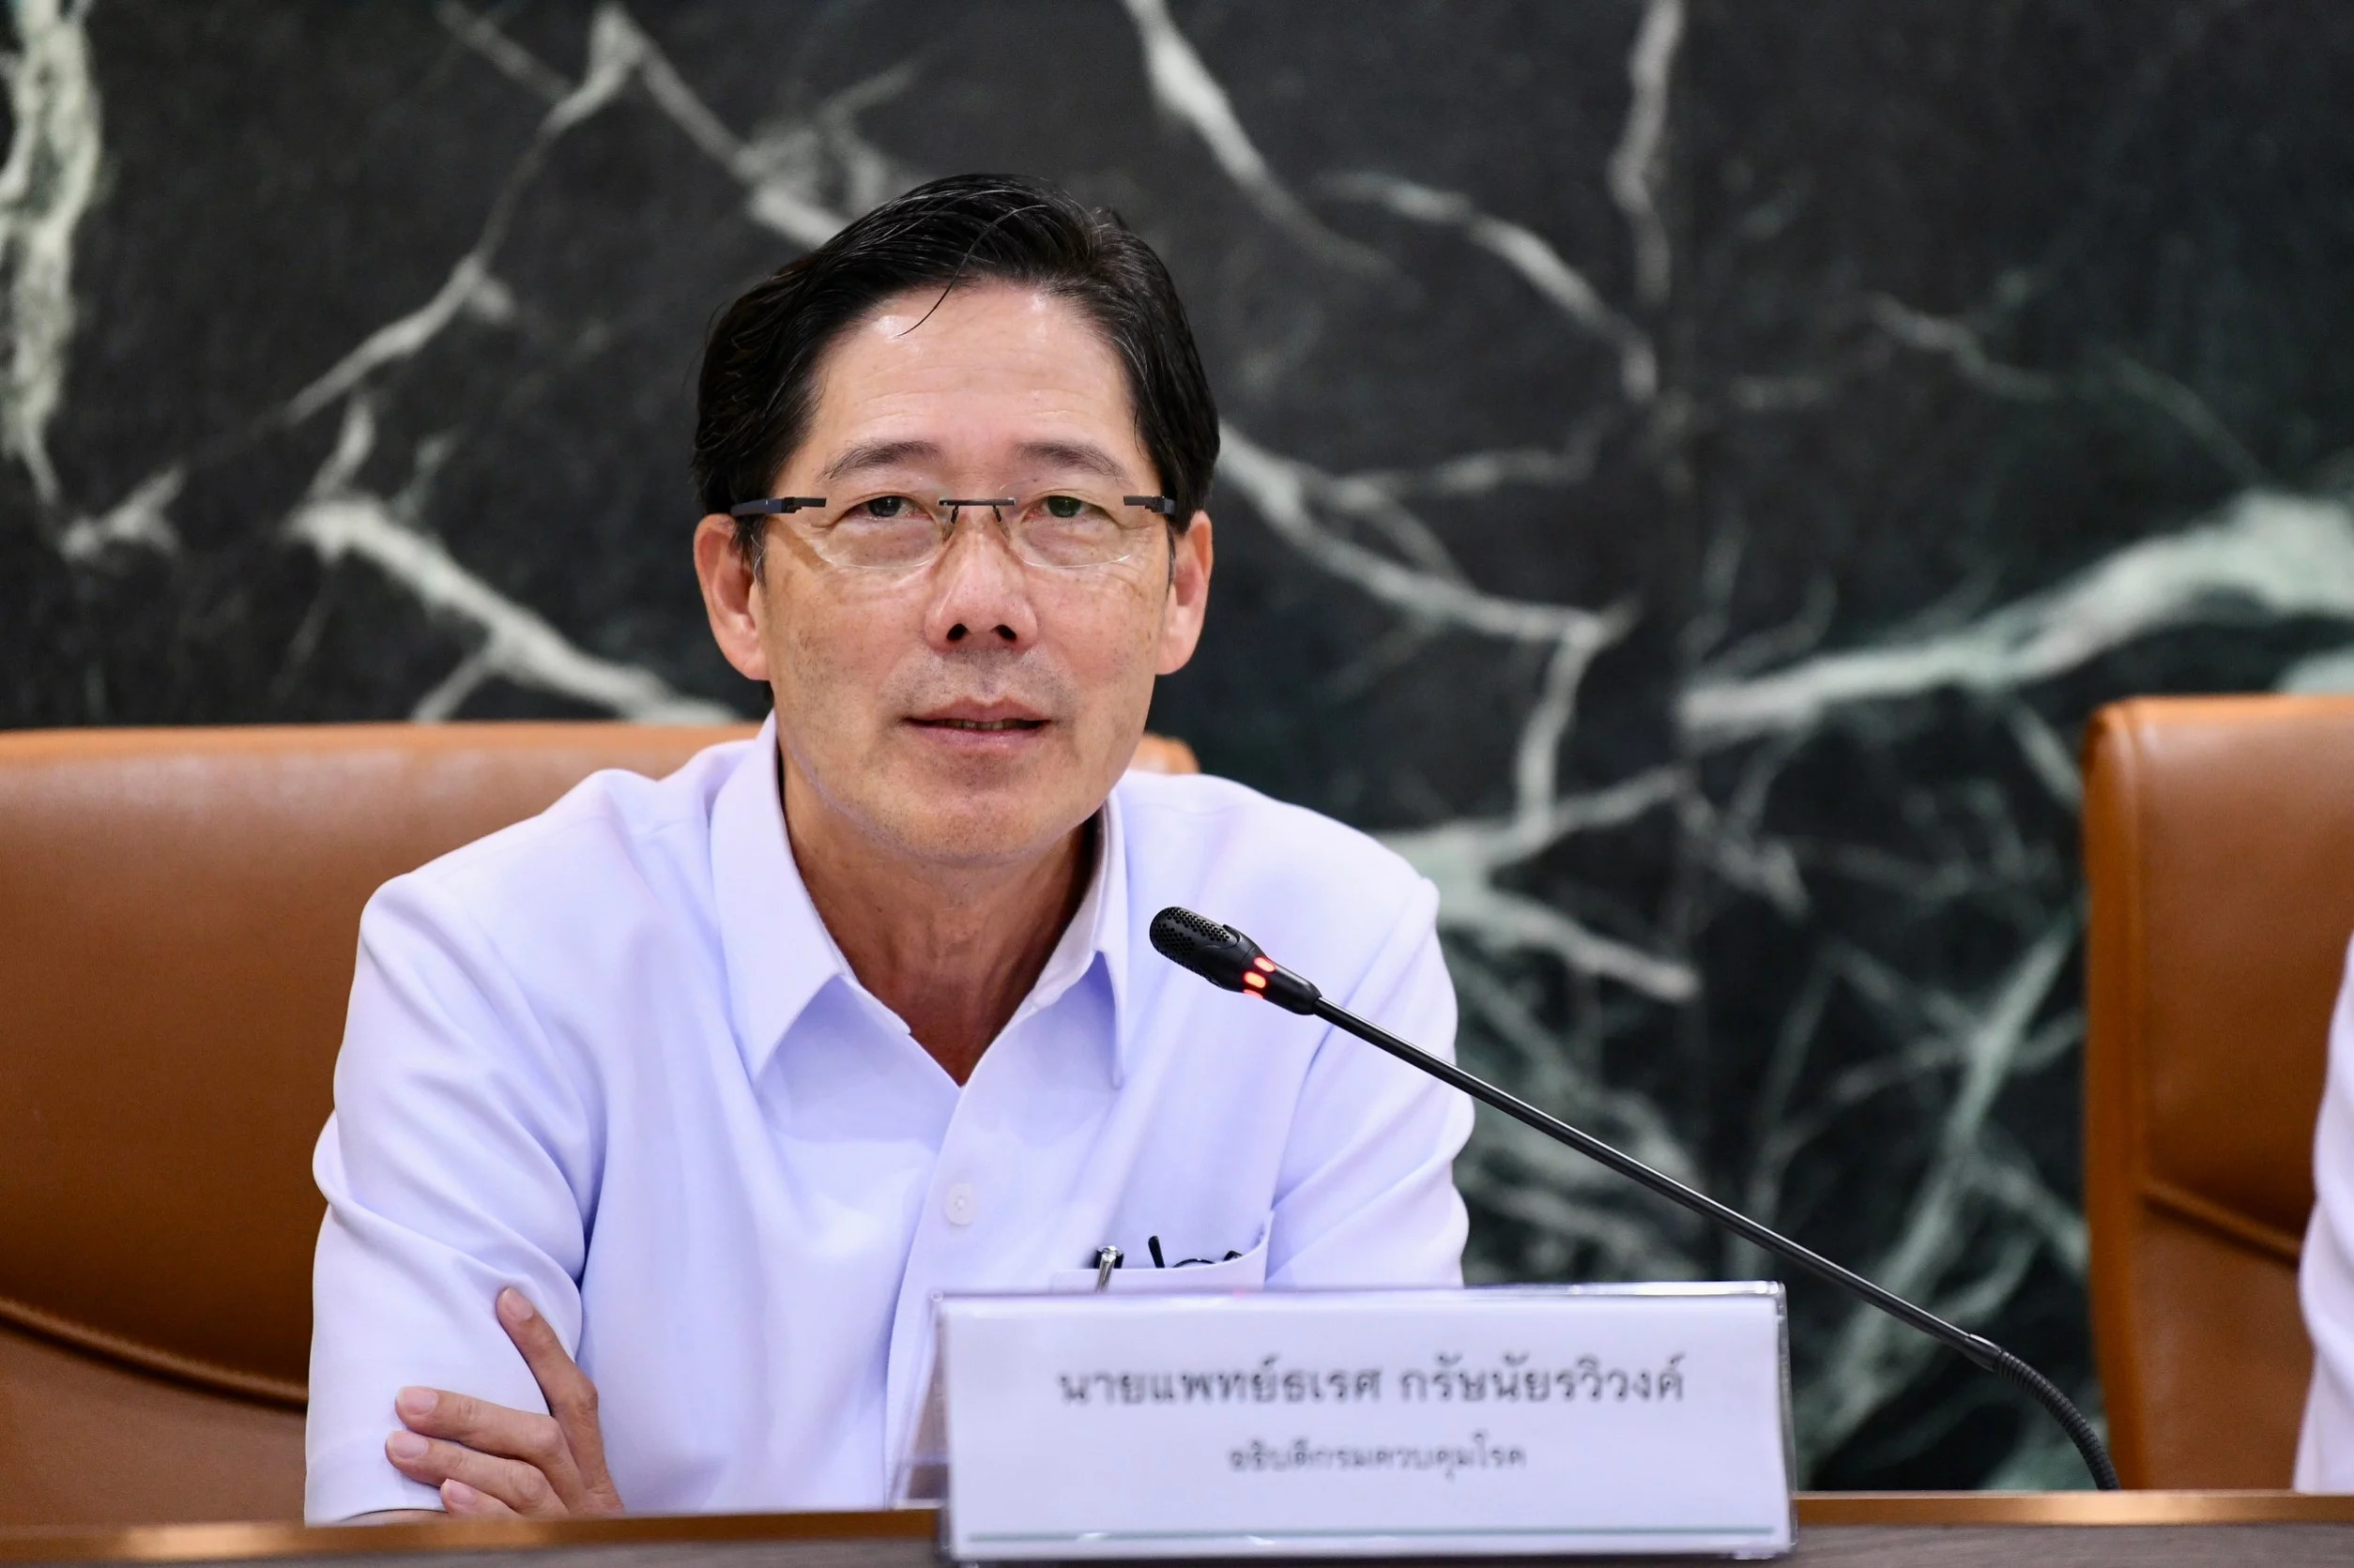 ThaiHealth backs plan to cut down salt consumption by 30% by 2025 following shocking discovery of 22 million salty-tooth NCD patients thaihealth